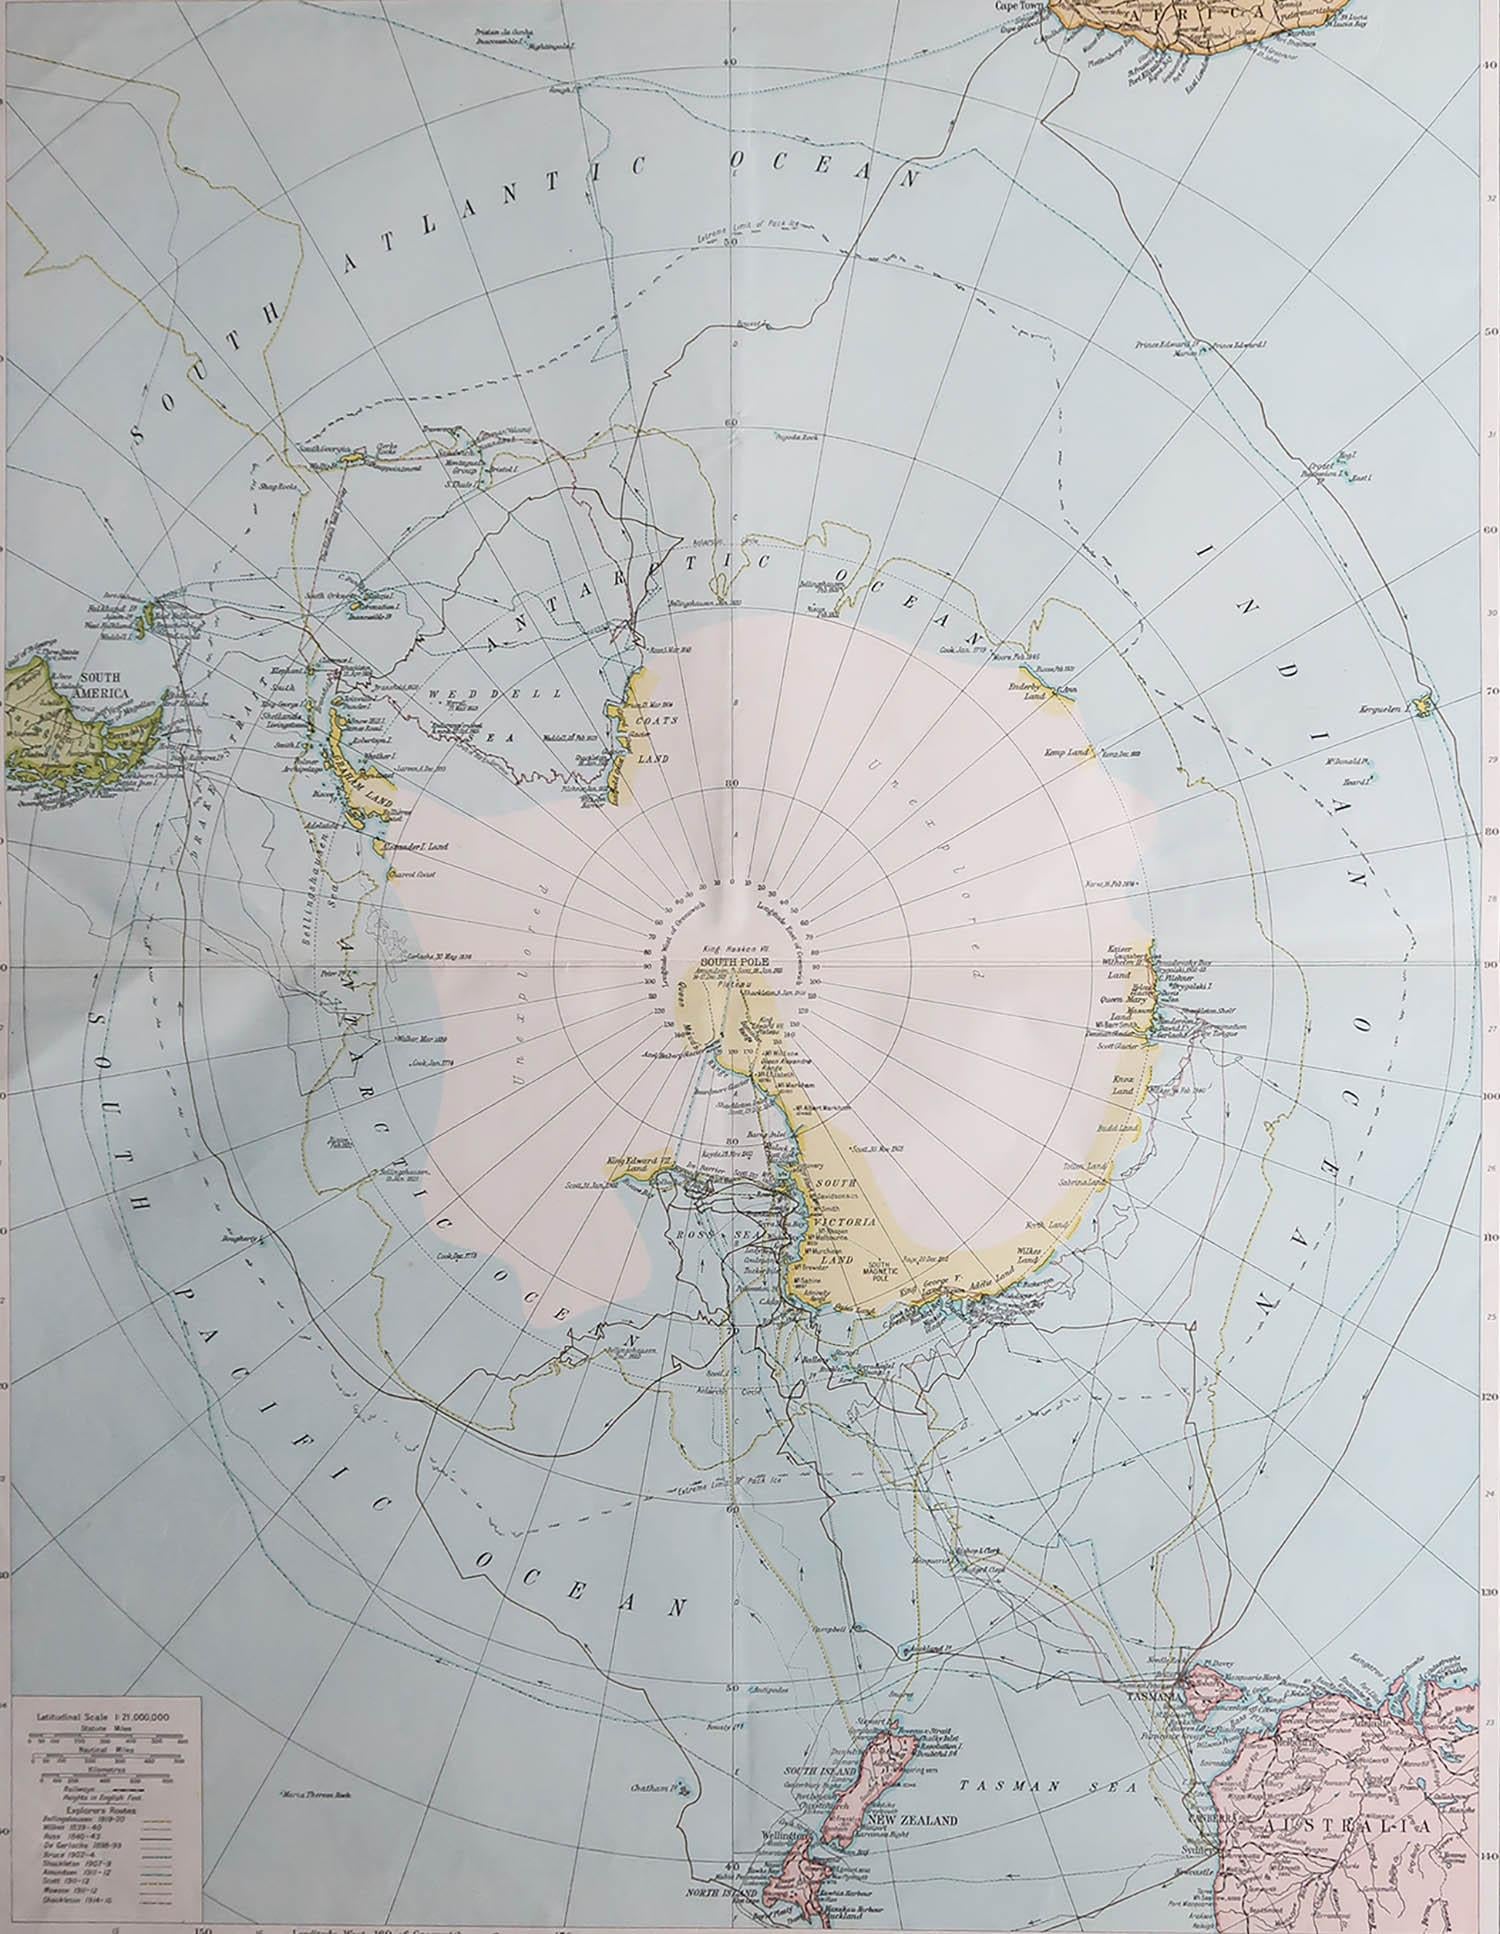 Great map of The South Pole

Original color.

Published by Alexander Gross

Unframed.

Repairs to minor edge tears








